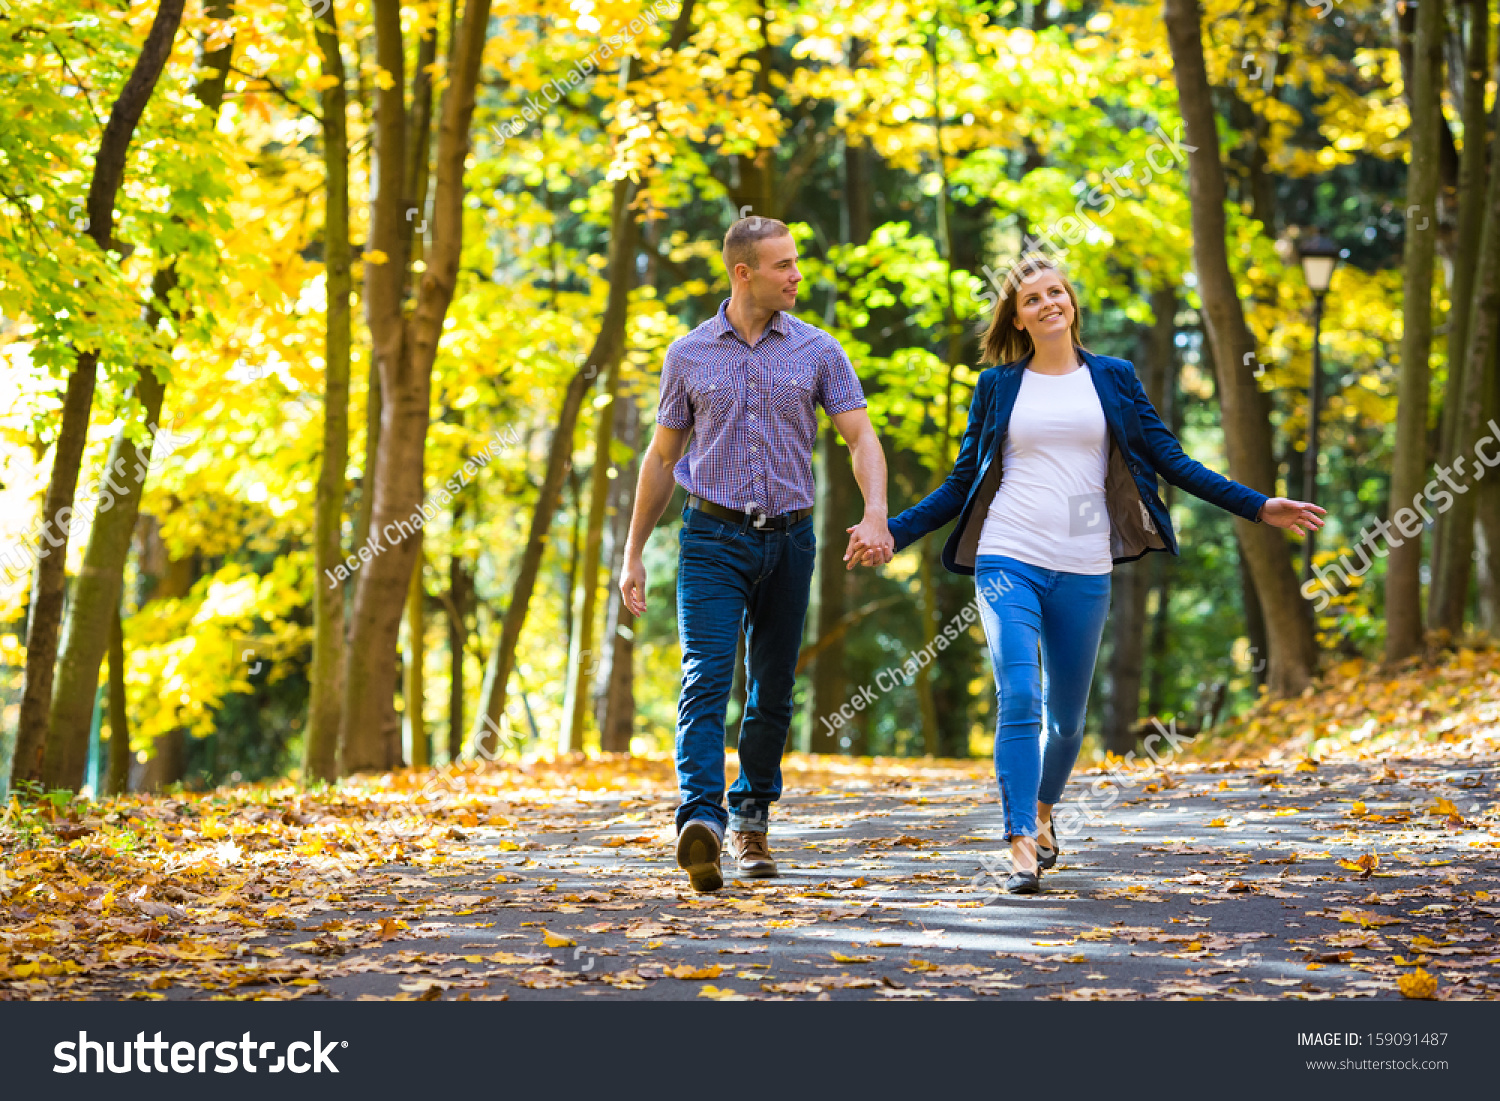 http://image.shutterstock.com/z/stock-photo-young-woman-and-man-walking-in-city-park-holding-hands-159091487.jpg